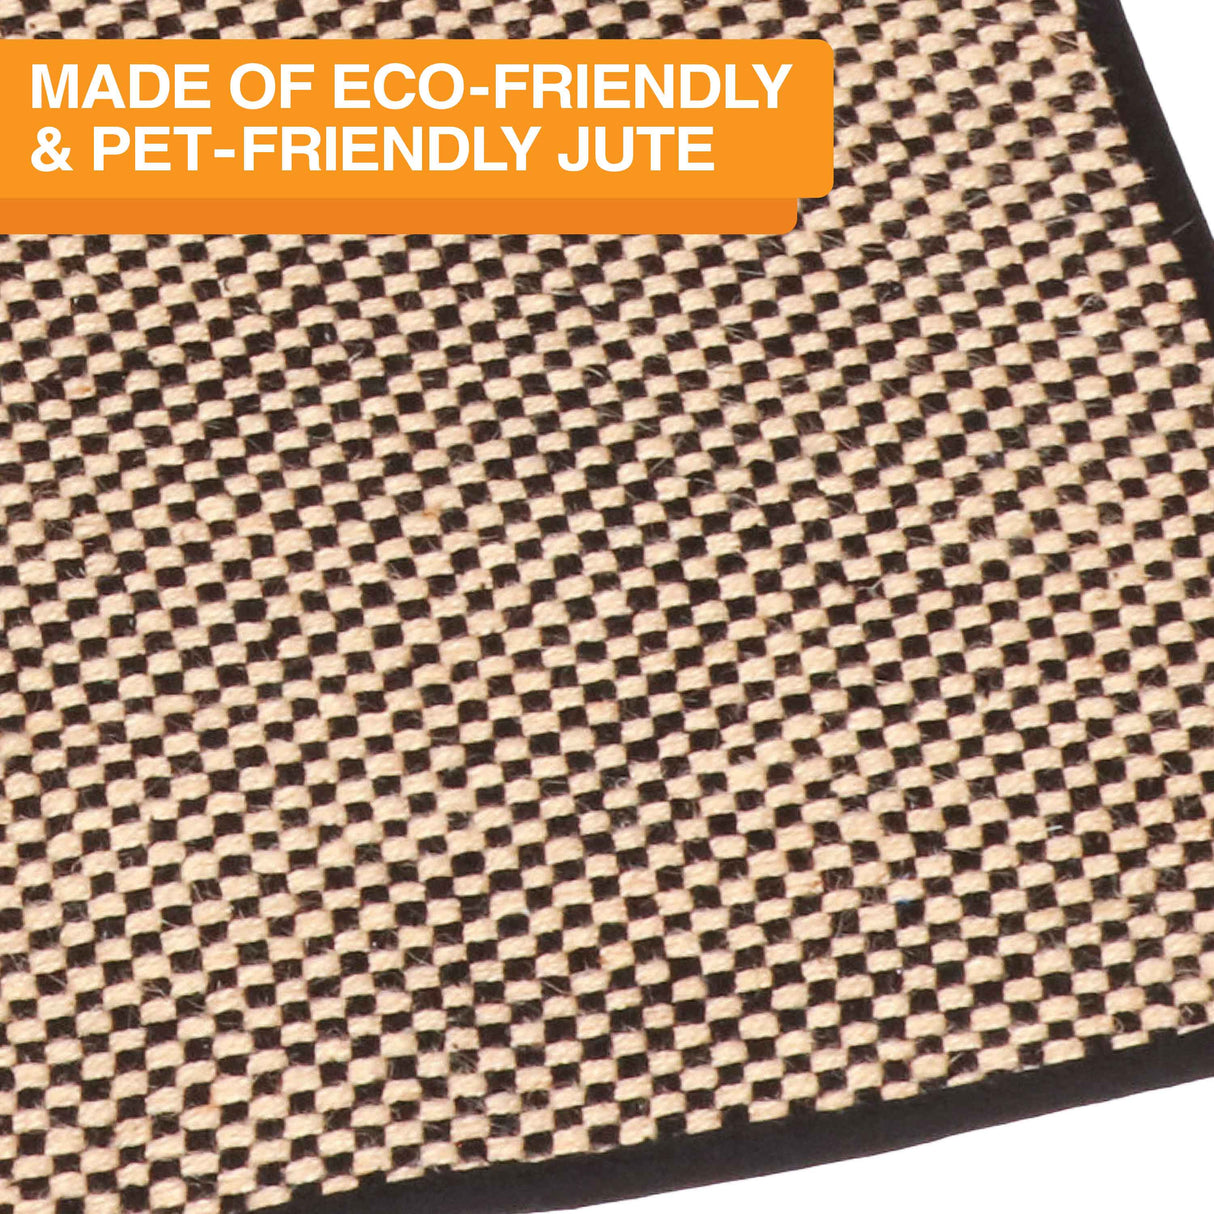 Checkered mat made of eco-friendly jute